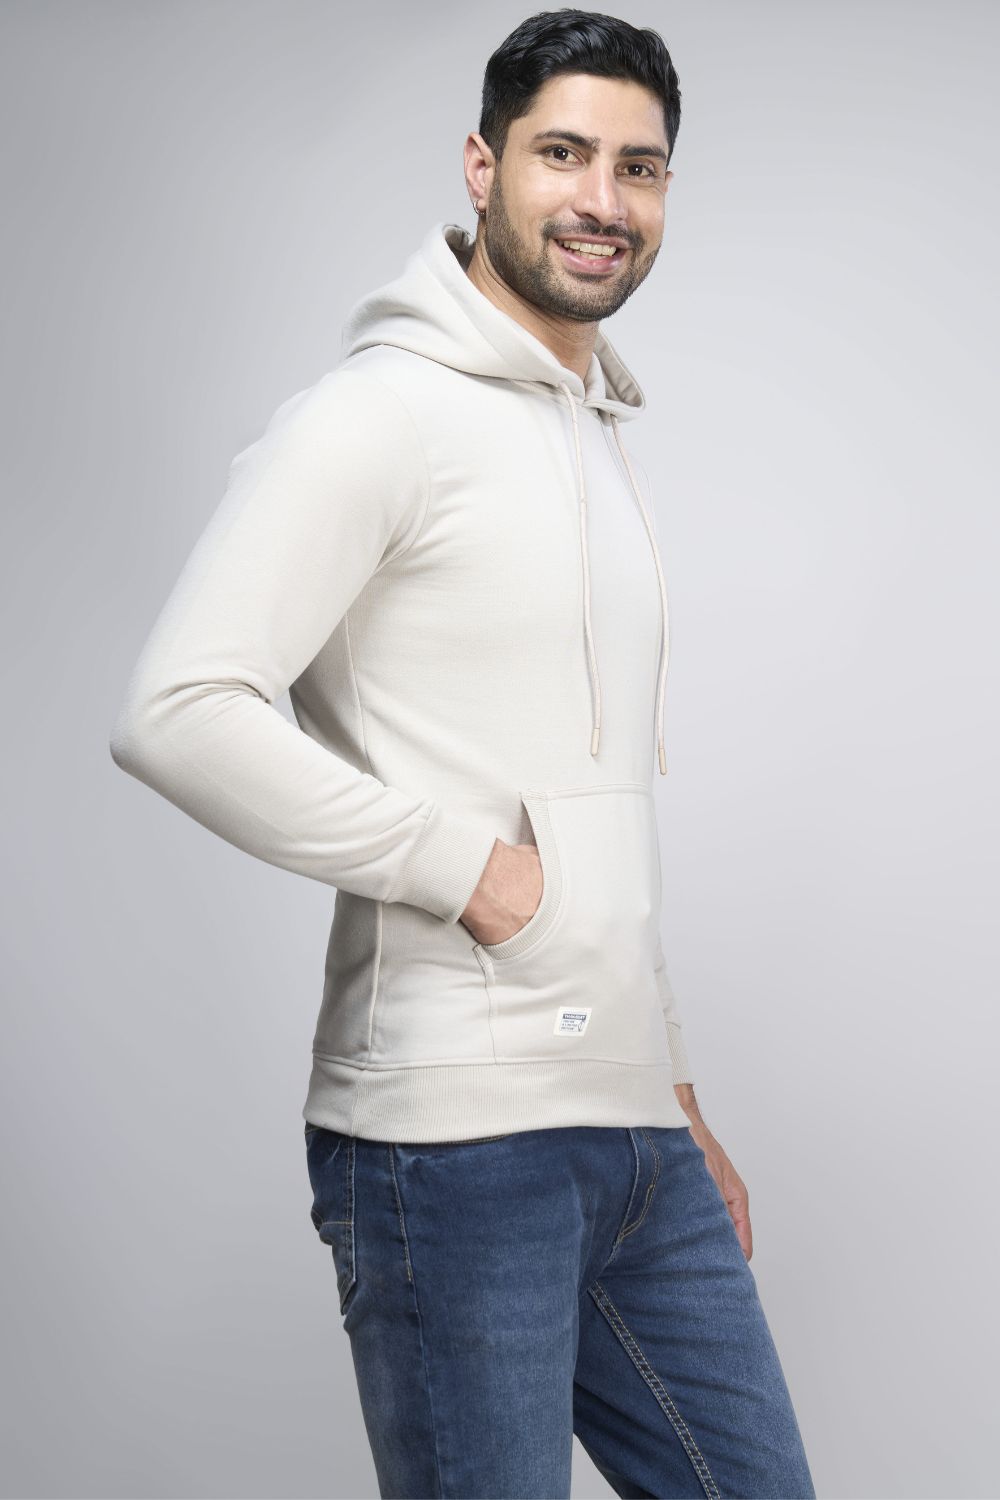 Silver Grey colored, hoodie for men with full sleeves and relaxed fit, side view.